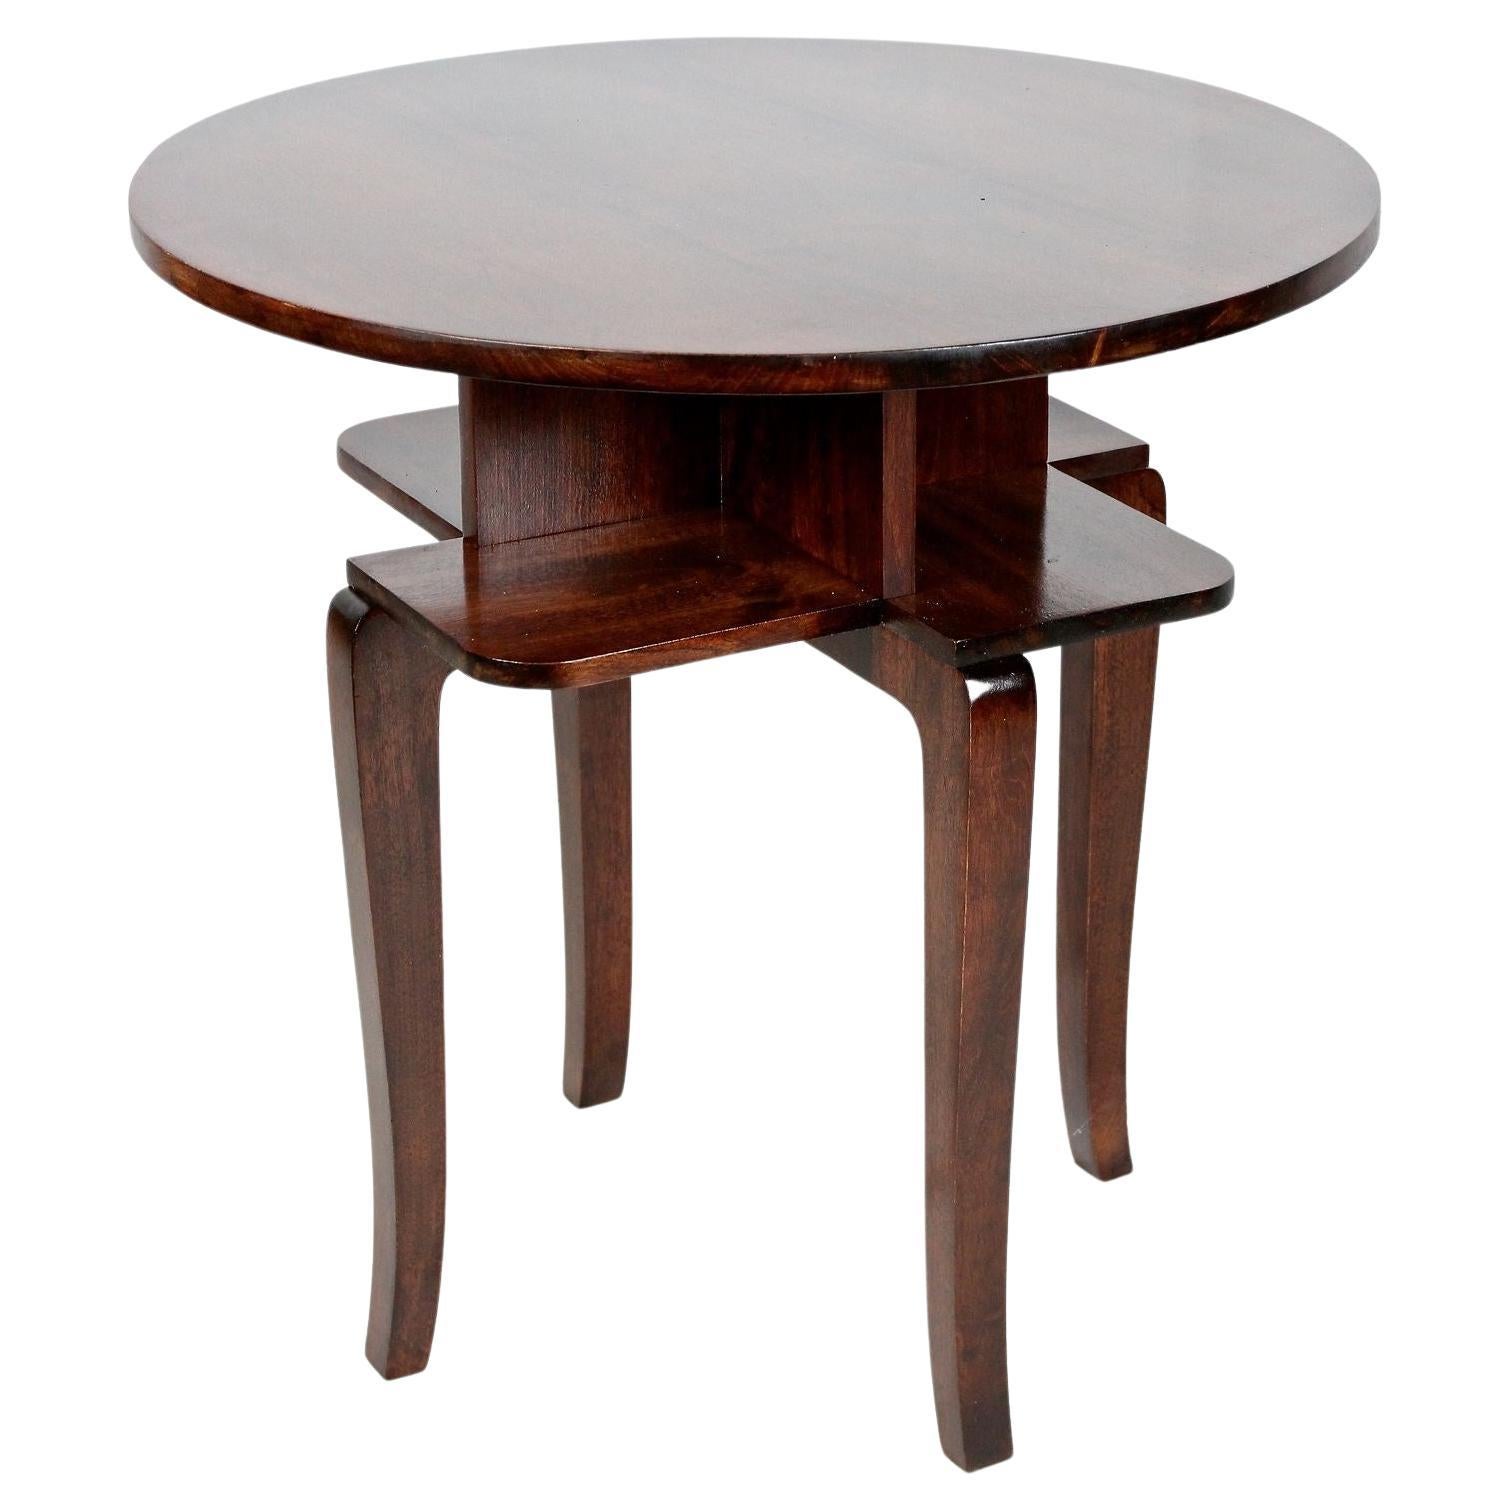 Round Art Deco Bentwood Side Table/ Coffee Table, Mahogany Style, AT ca. 1920